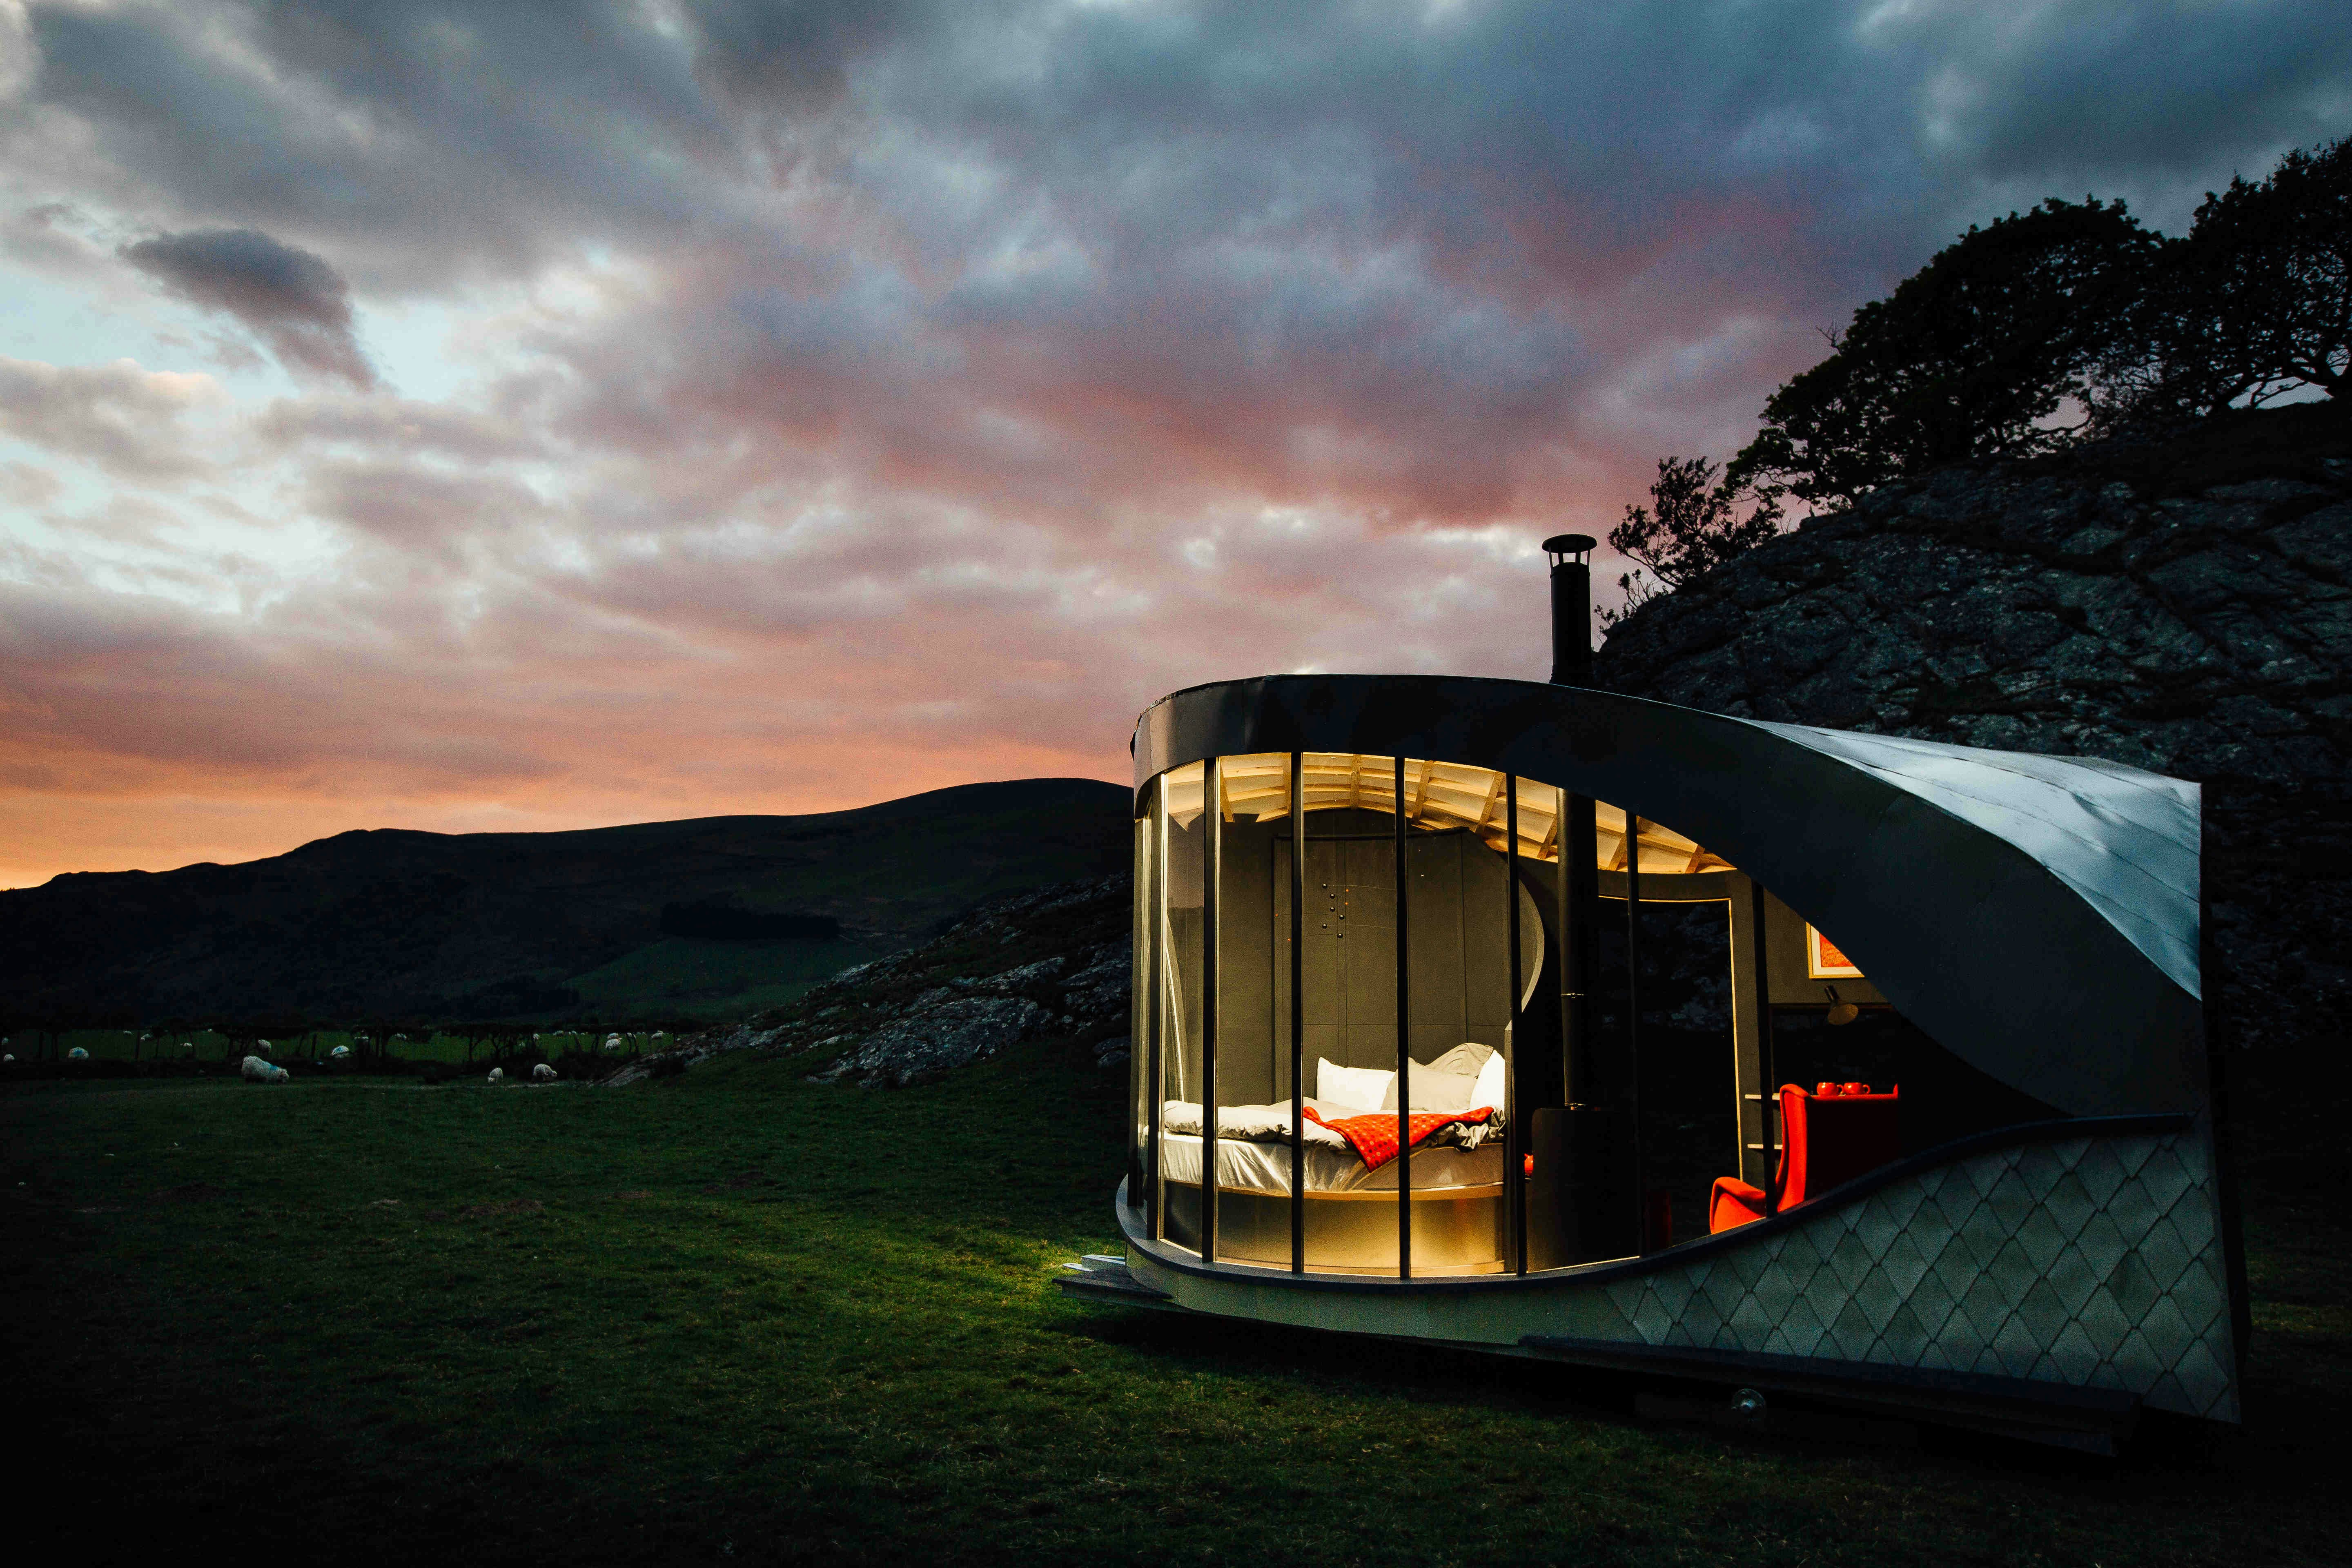 A glamping cabin in the Welsh countryside.